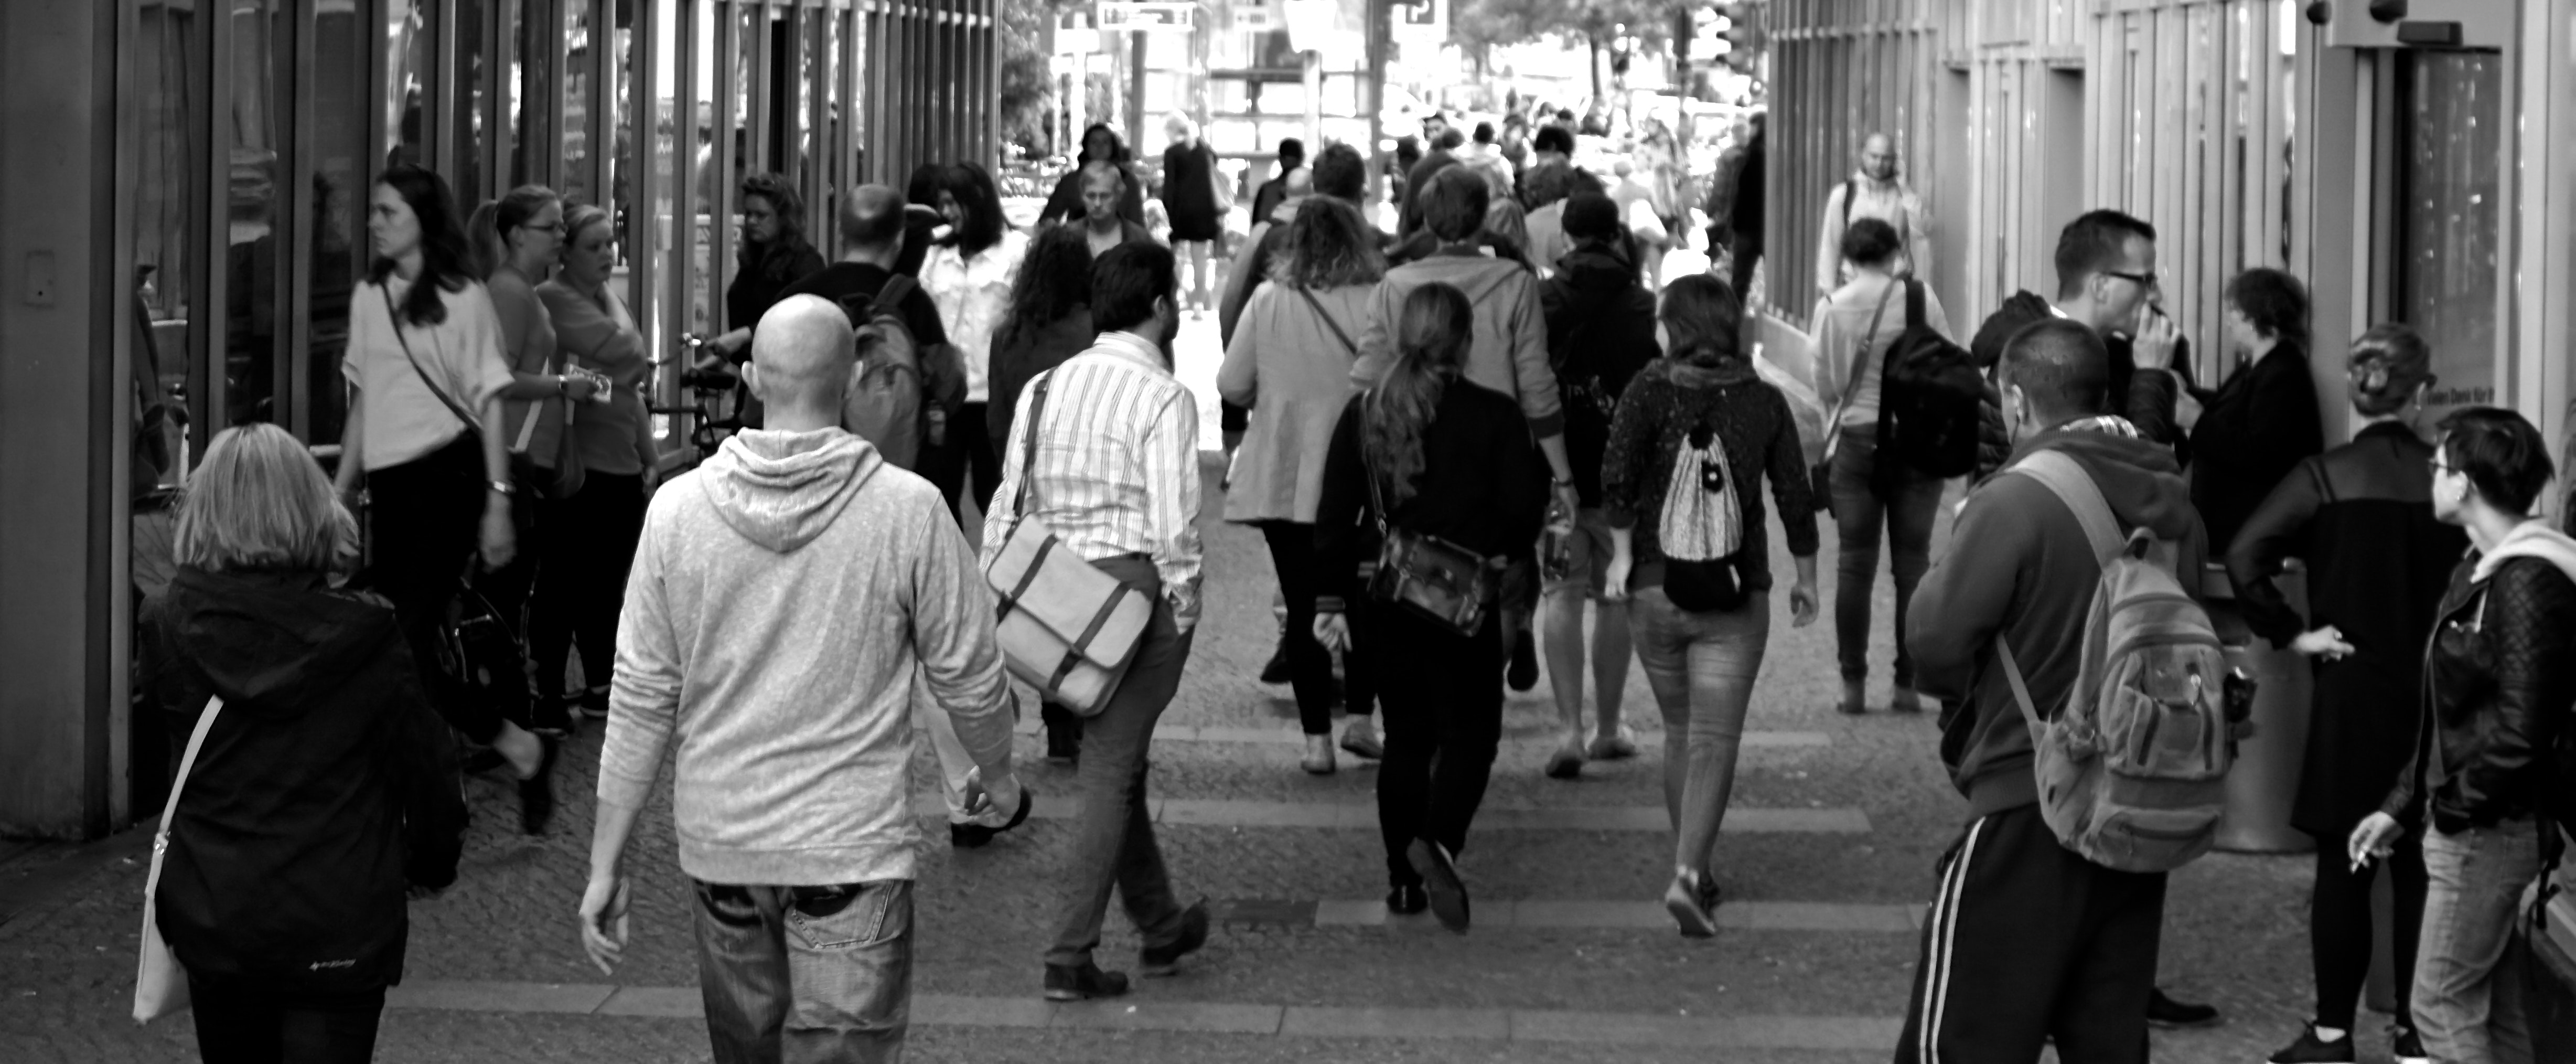 Image of people walking around in black and white